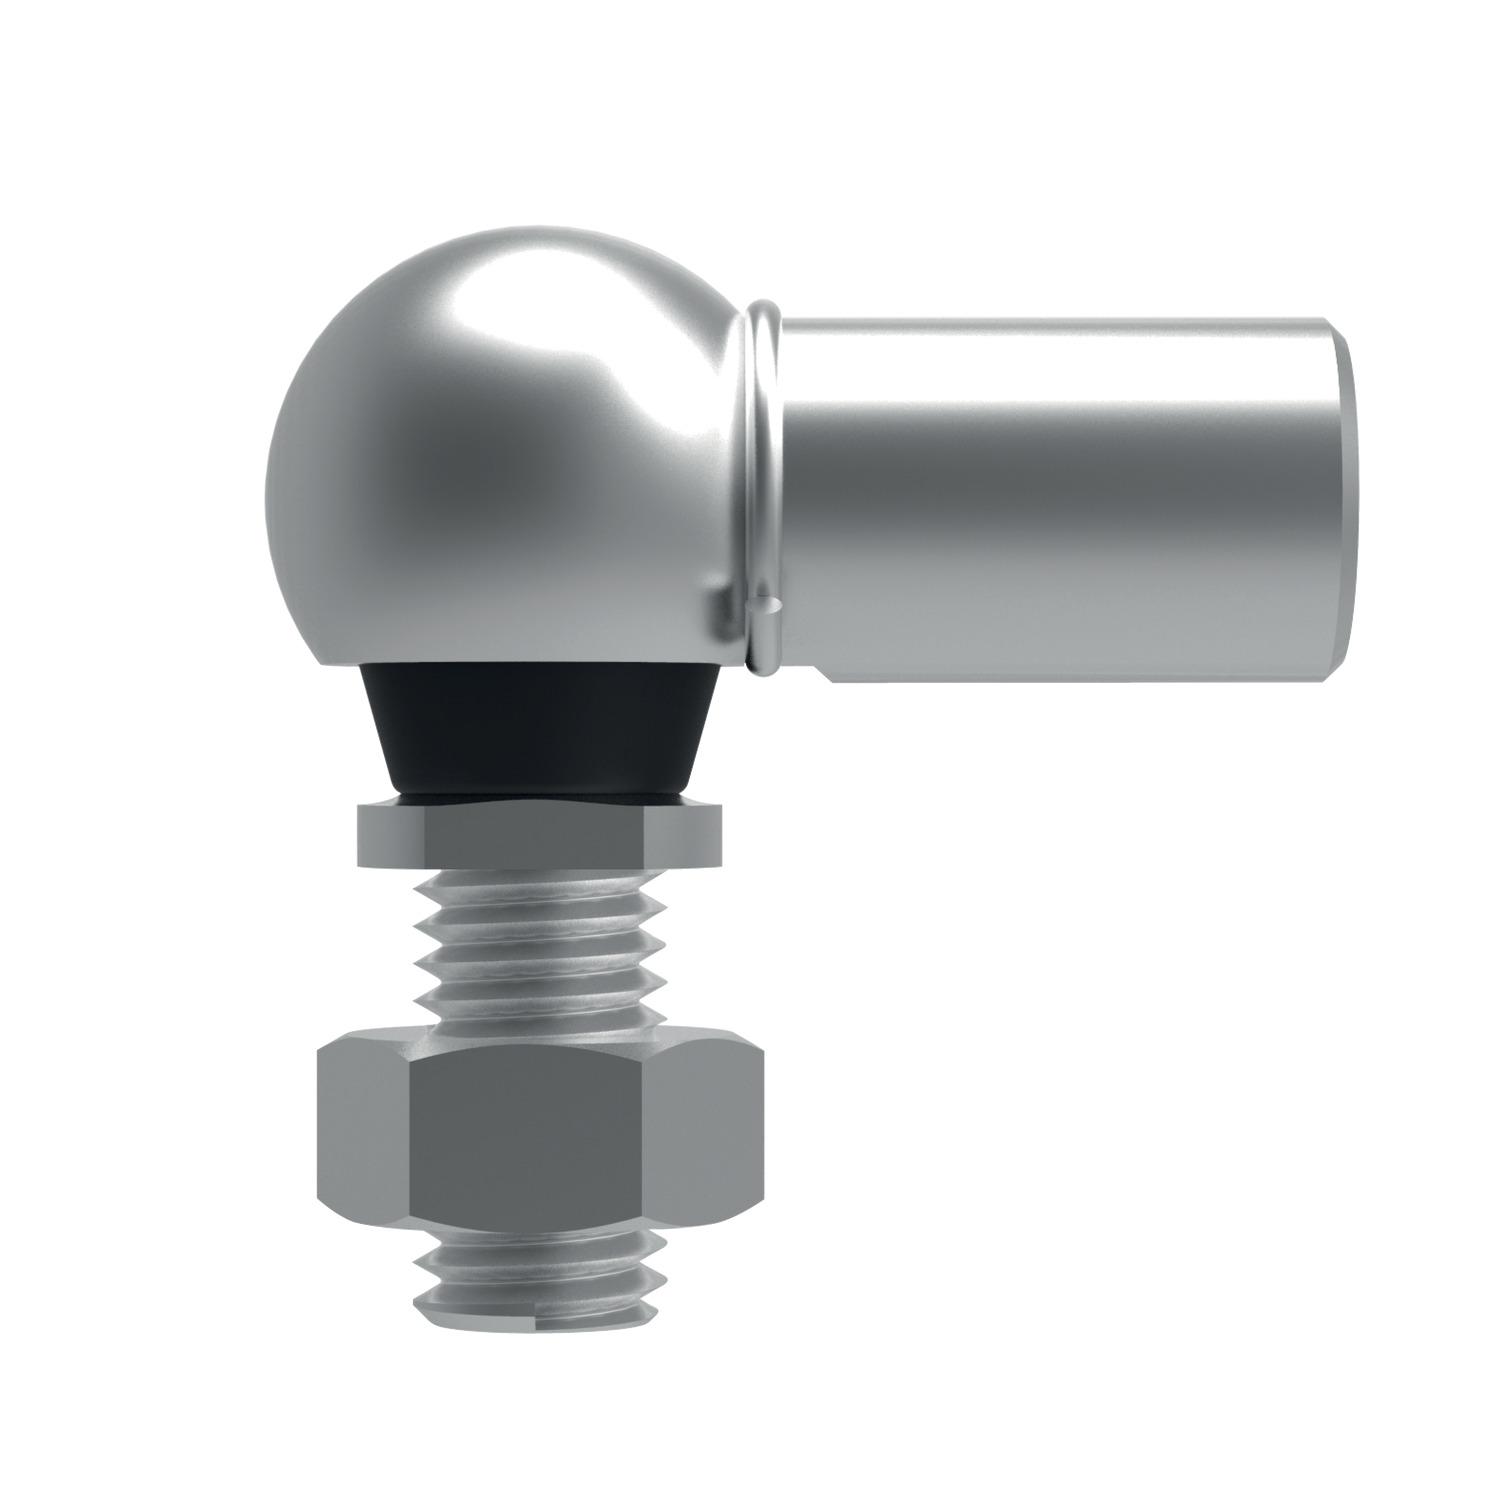 Product R3470, Ball and Socket Joints with sealing cap / 